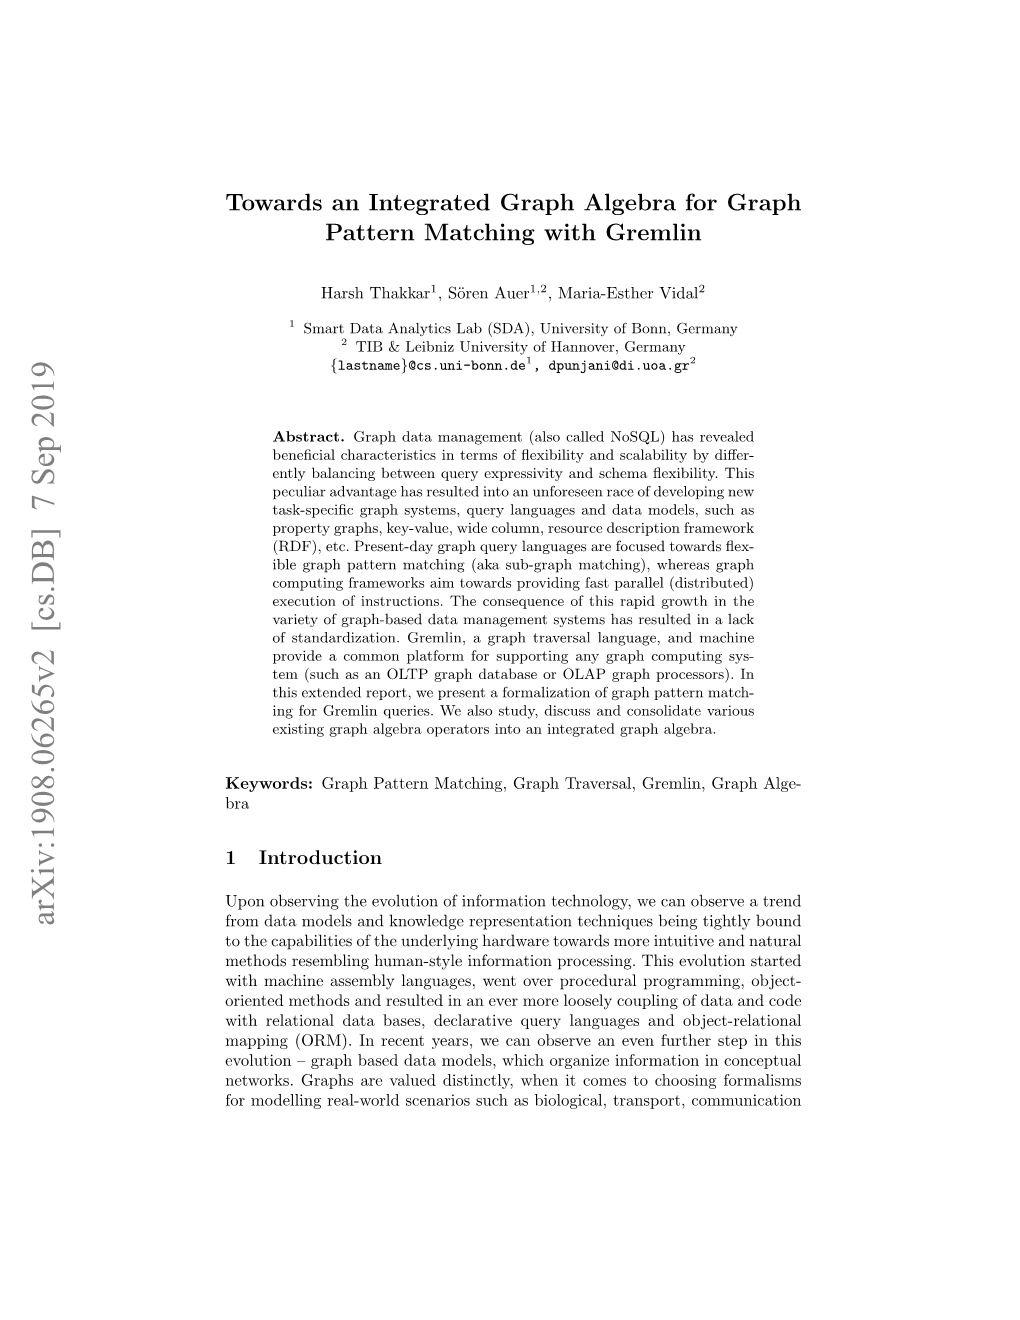 Towards an Integrated Graph Algebra for Graph Pattern Matching with Gremlin